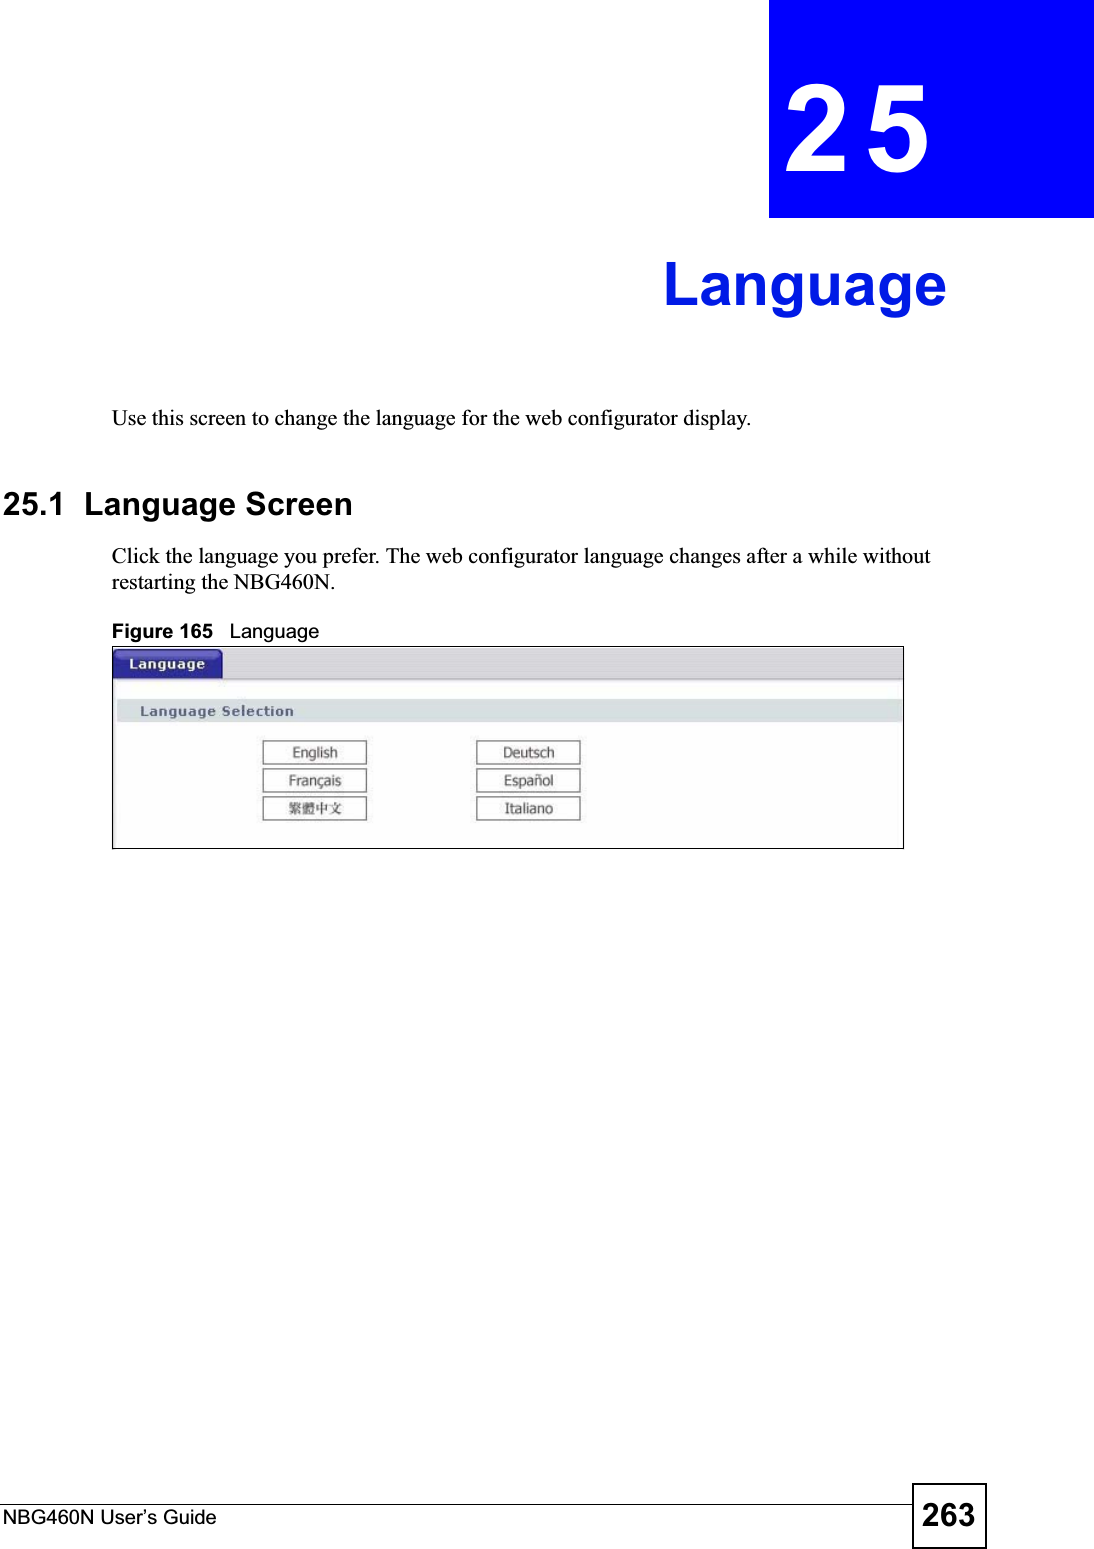 NBG460N User’s Guide 263CHAPTER 25LanguageUse this screen to change the language for the web configurator display.25.1  Language ScreenClick the language you prefer. The web configurator language changes after a while without restarting the NBG460N.Figure 165   Language